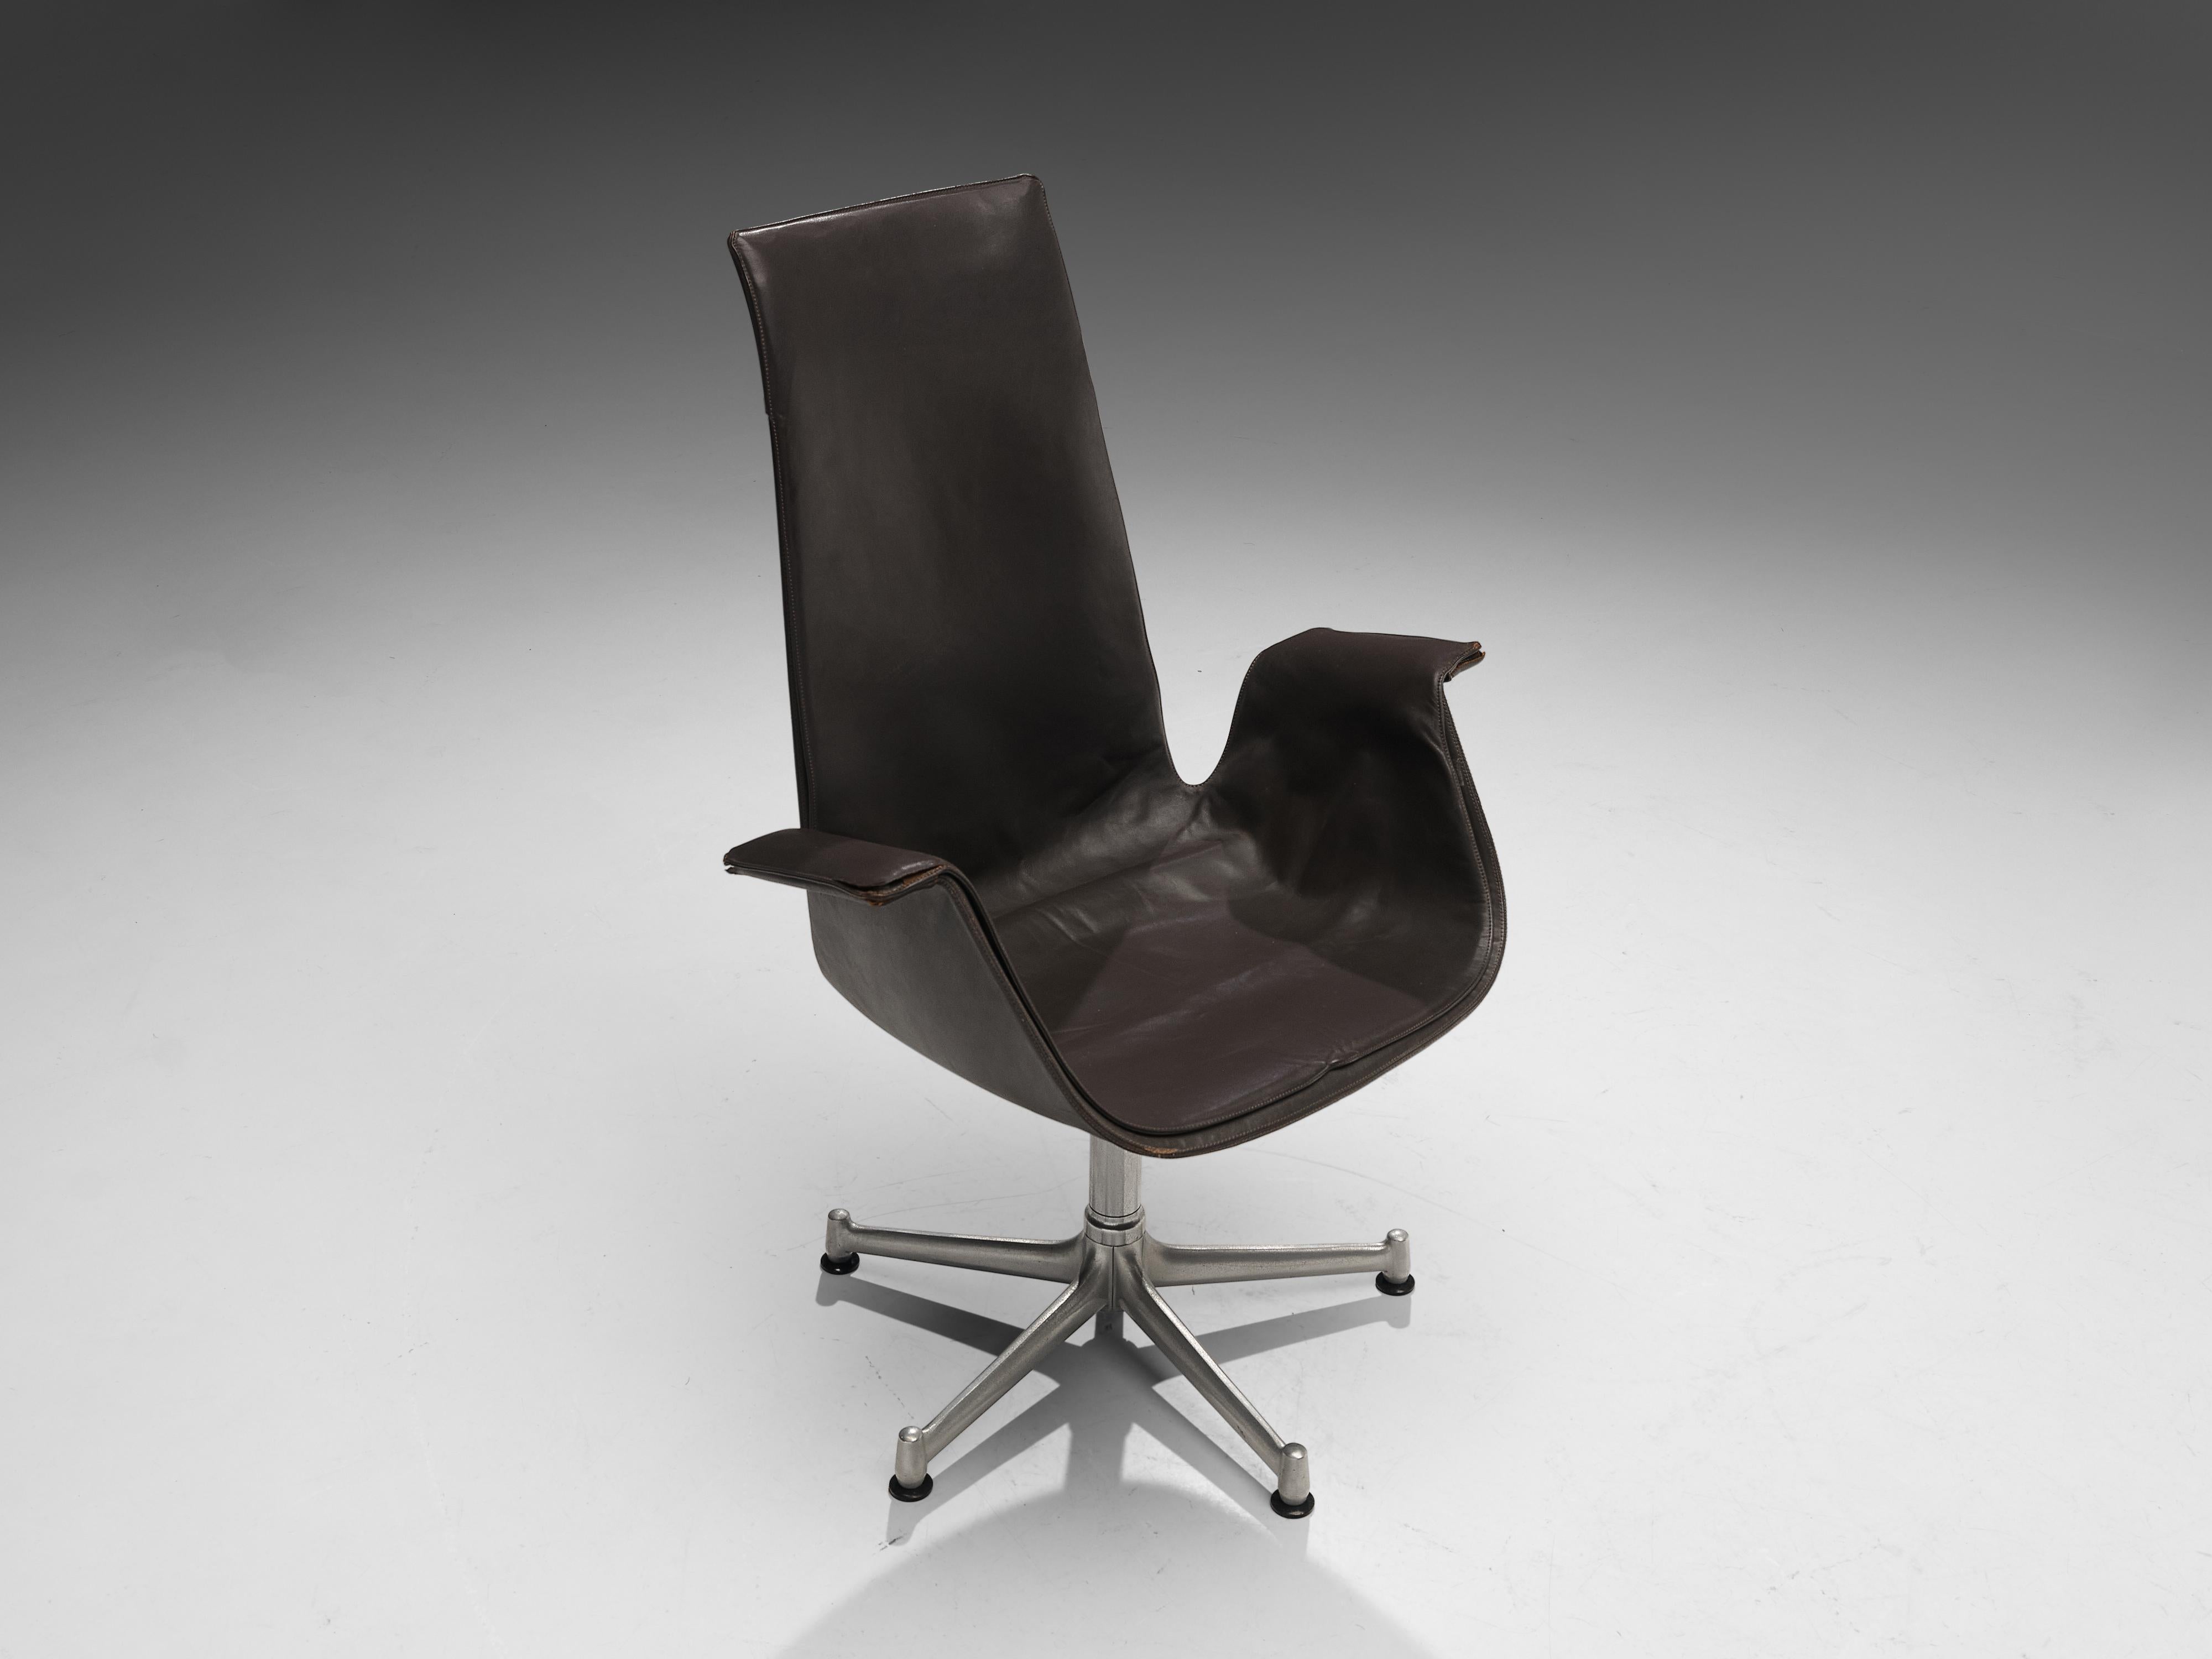 Preben Fabricius and Jørgen Kastholm for Kill International, chair model 'FK 6725', leather, steel, Denmark, designed in 1966

Wonderful 'Bird chair' by designer duo Fabricius & Kastholm. Due to the fiberglass shell, the form is very organic. The